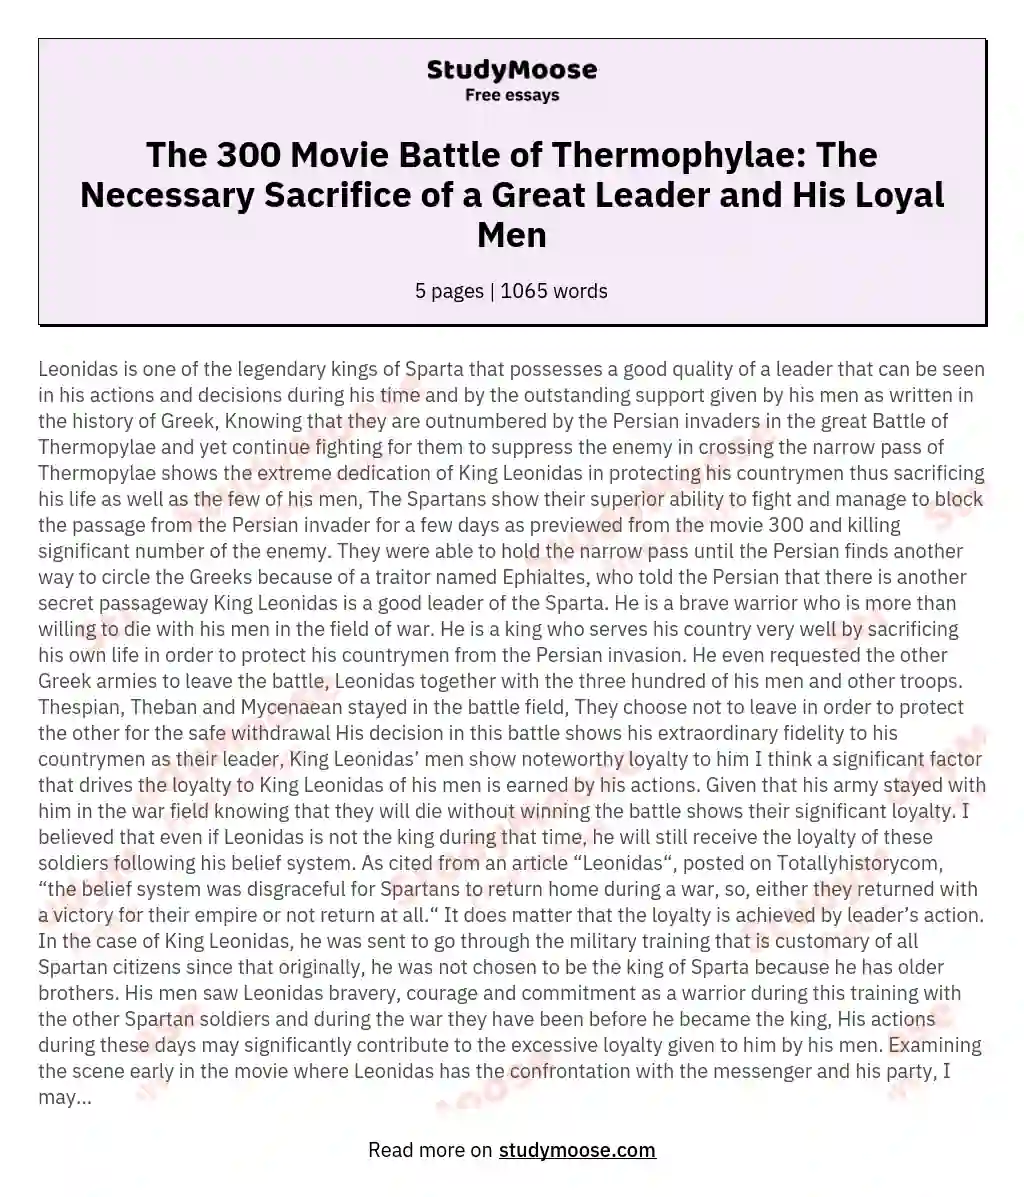 The 300 Movie Battle of Thermophylae: The Necessary Sacrifice of a Great Leader and His Loyal Men essay